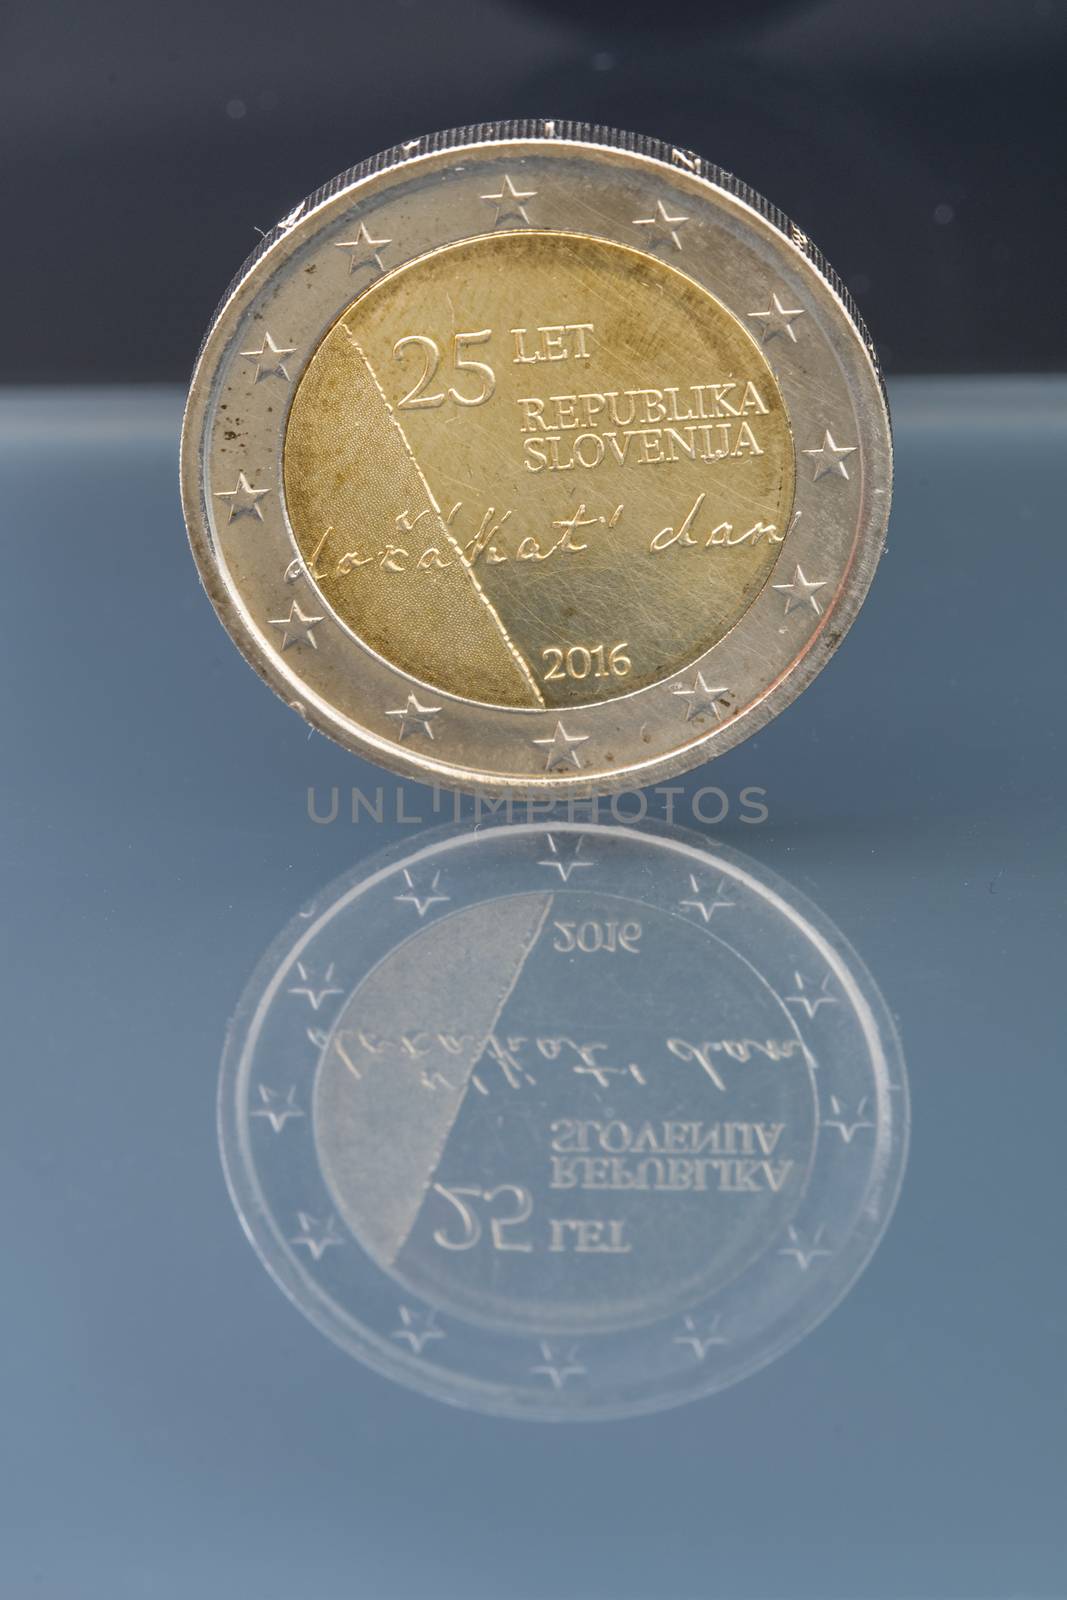 Commemorative 2 EUR coin celebrating 25 years of Slovenia's inde by asafaric